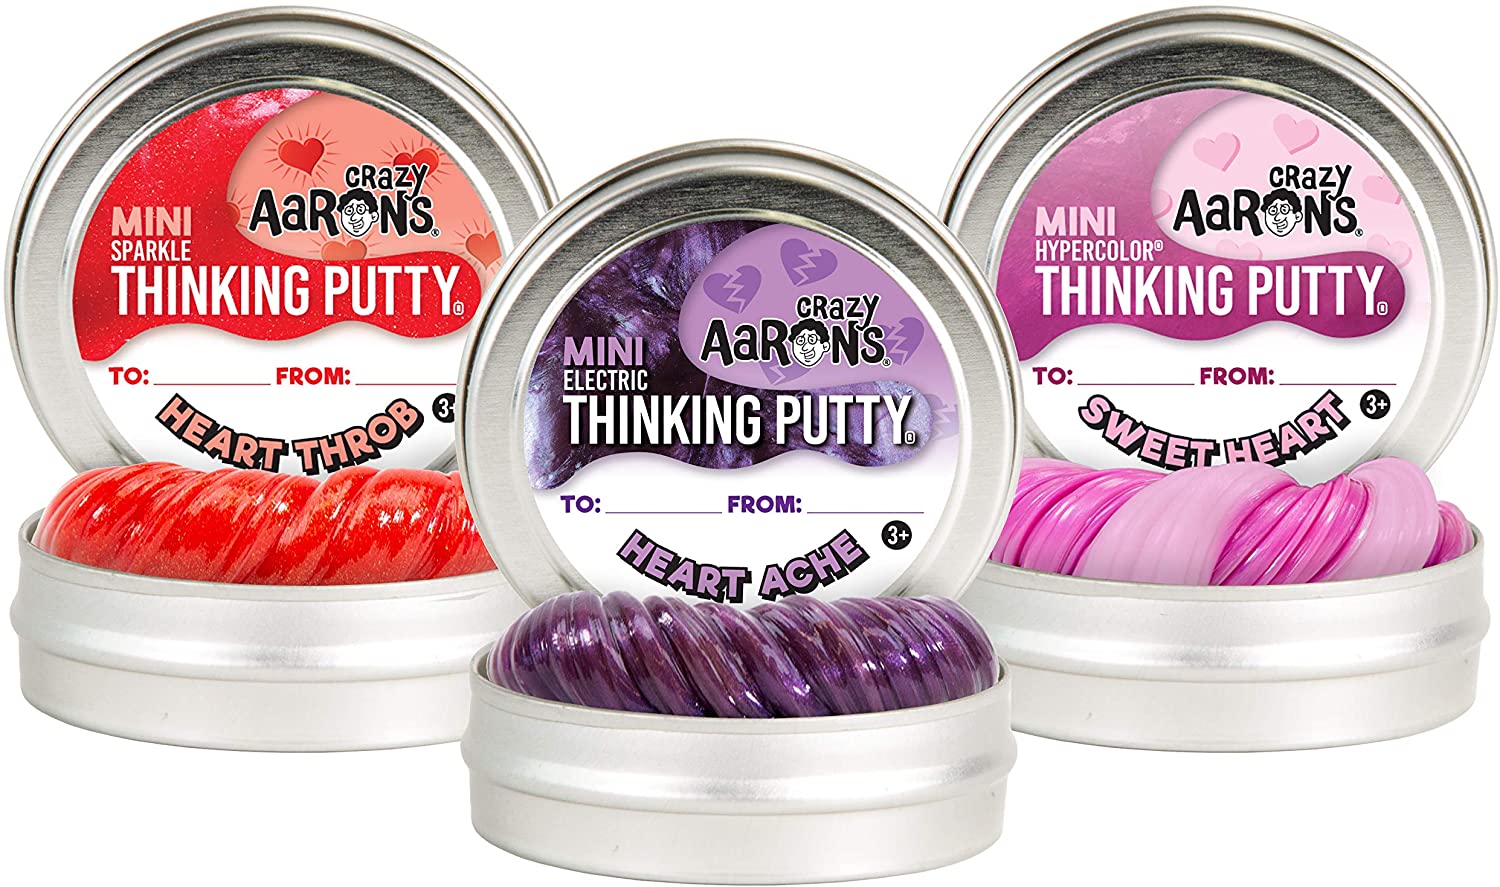 SWEET HEART Valentine's Day Holiday Crazy Aaron's Thinking Putty 2" 